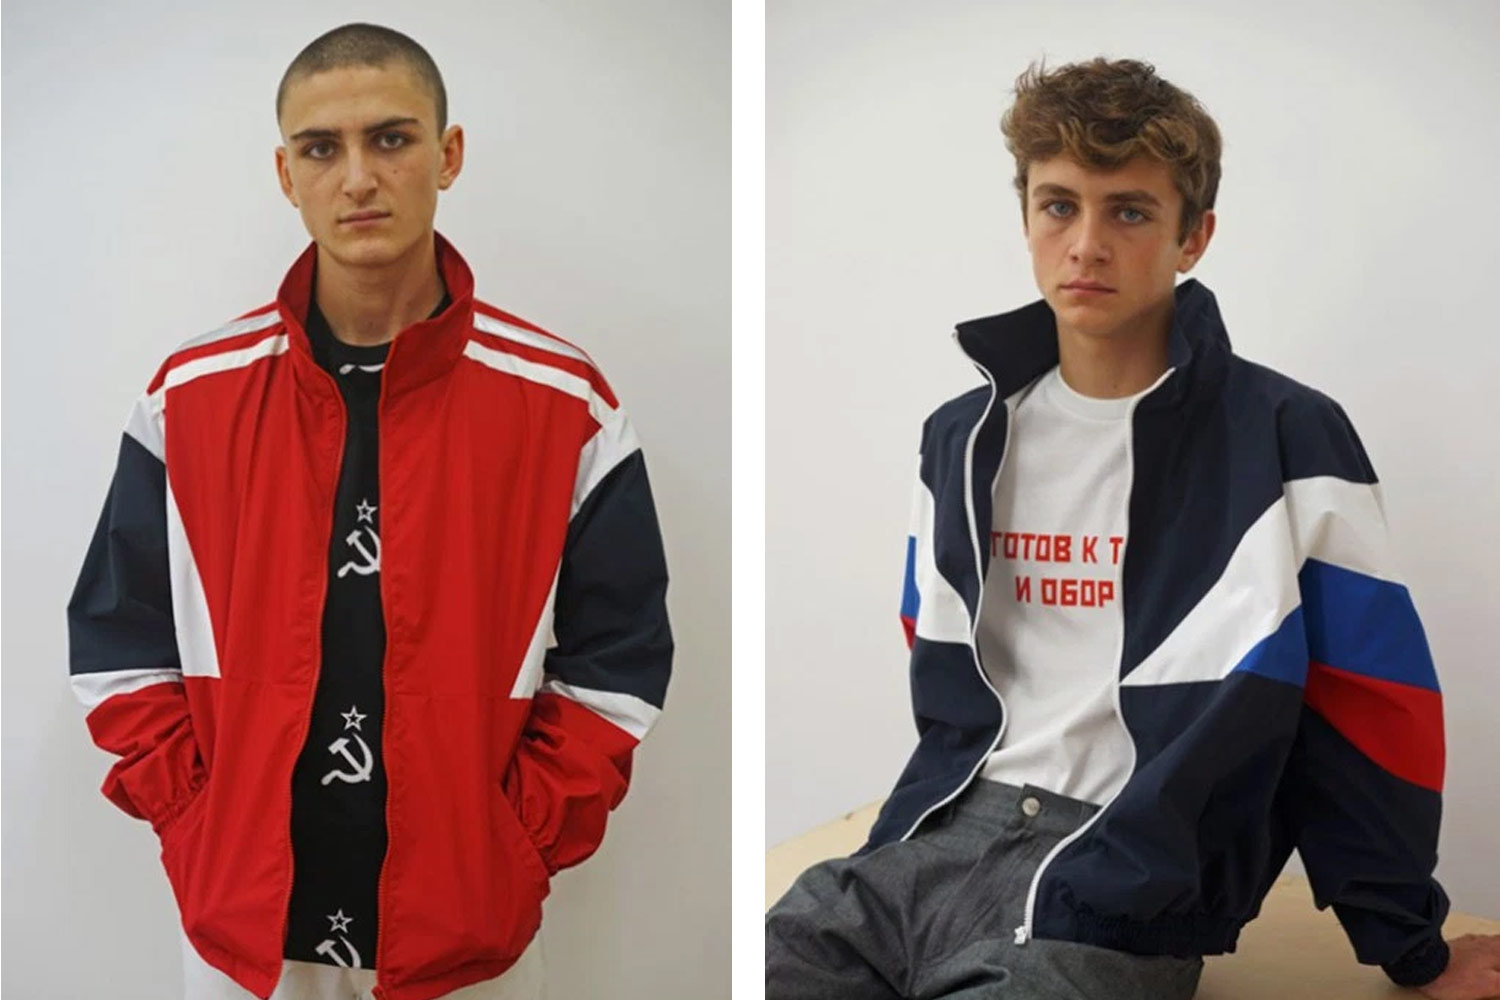 From Gosha Rubchinsky's Spring/Summer 2016 collection